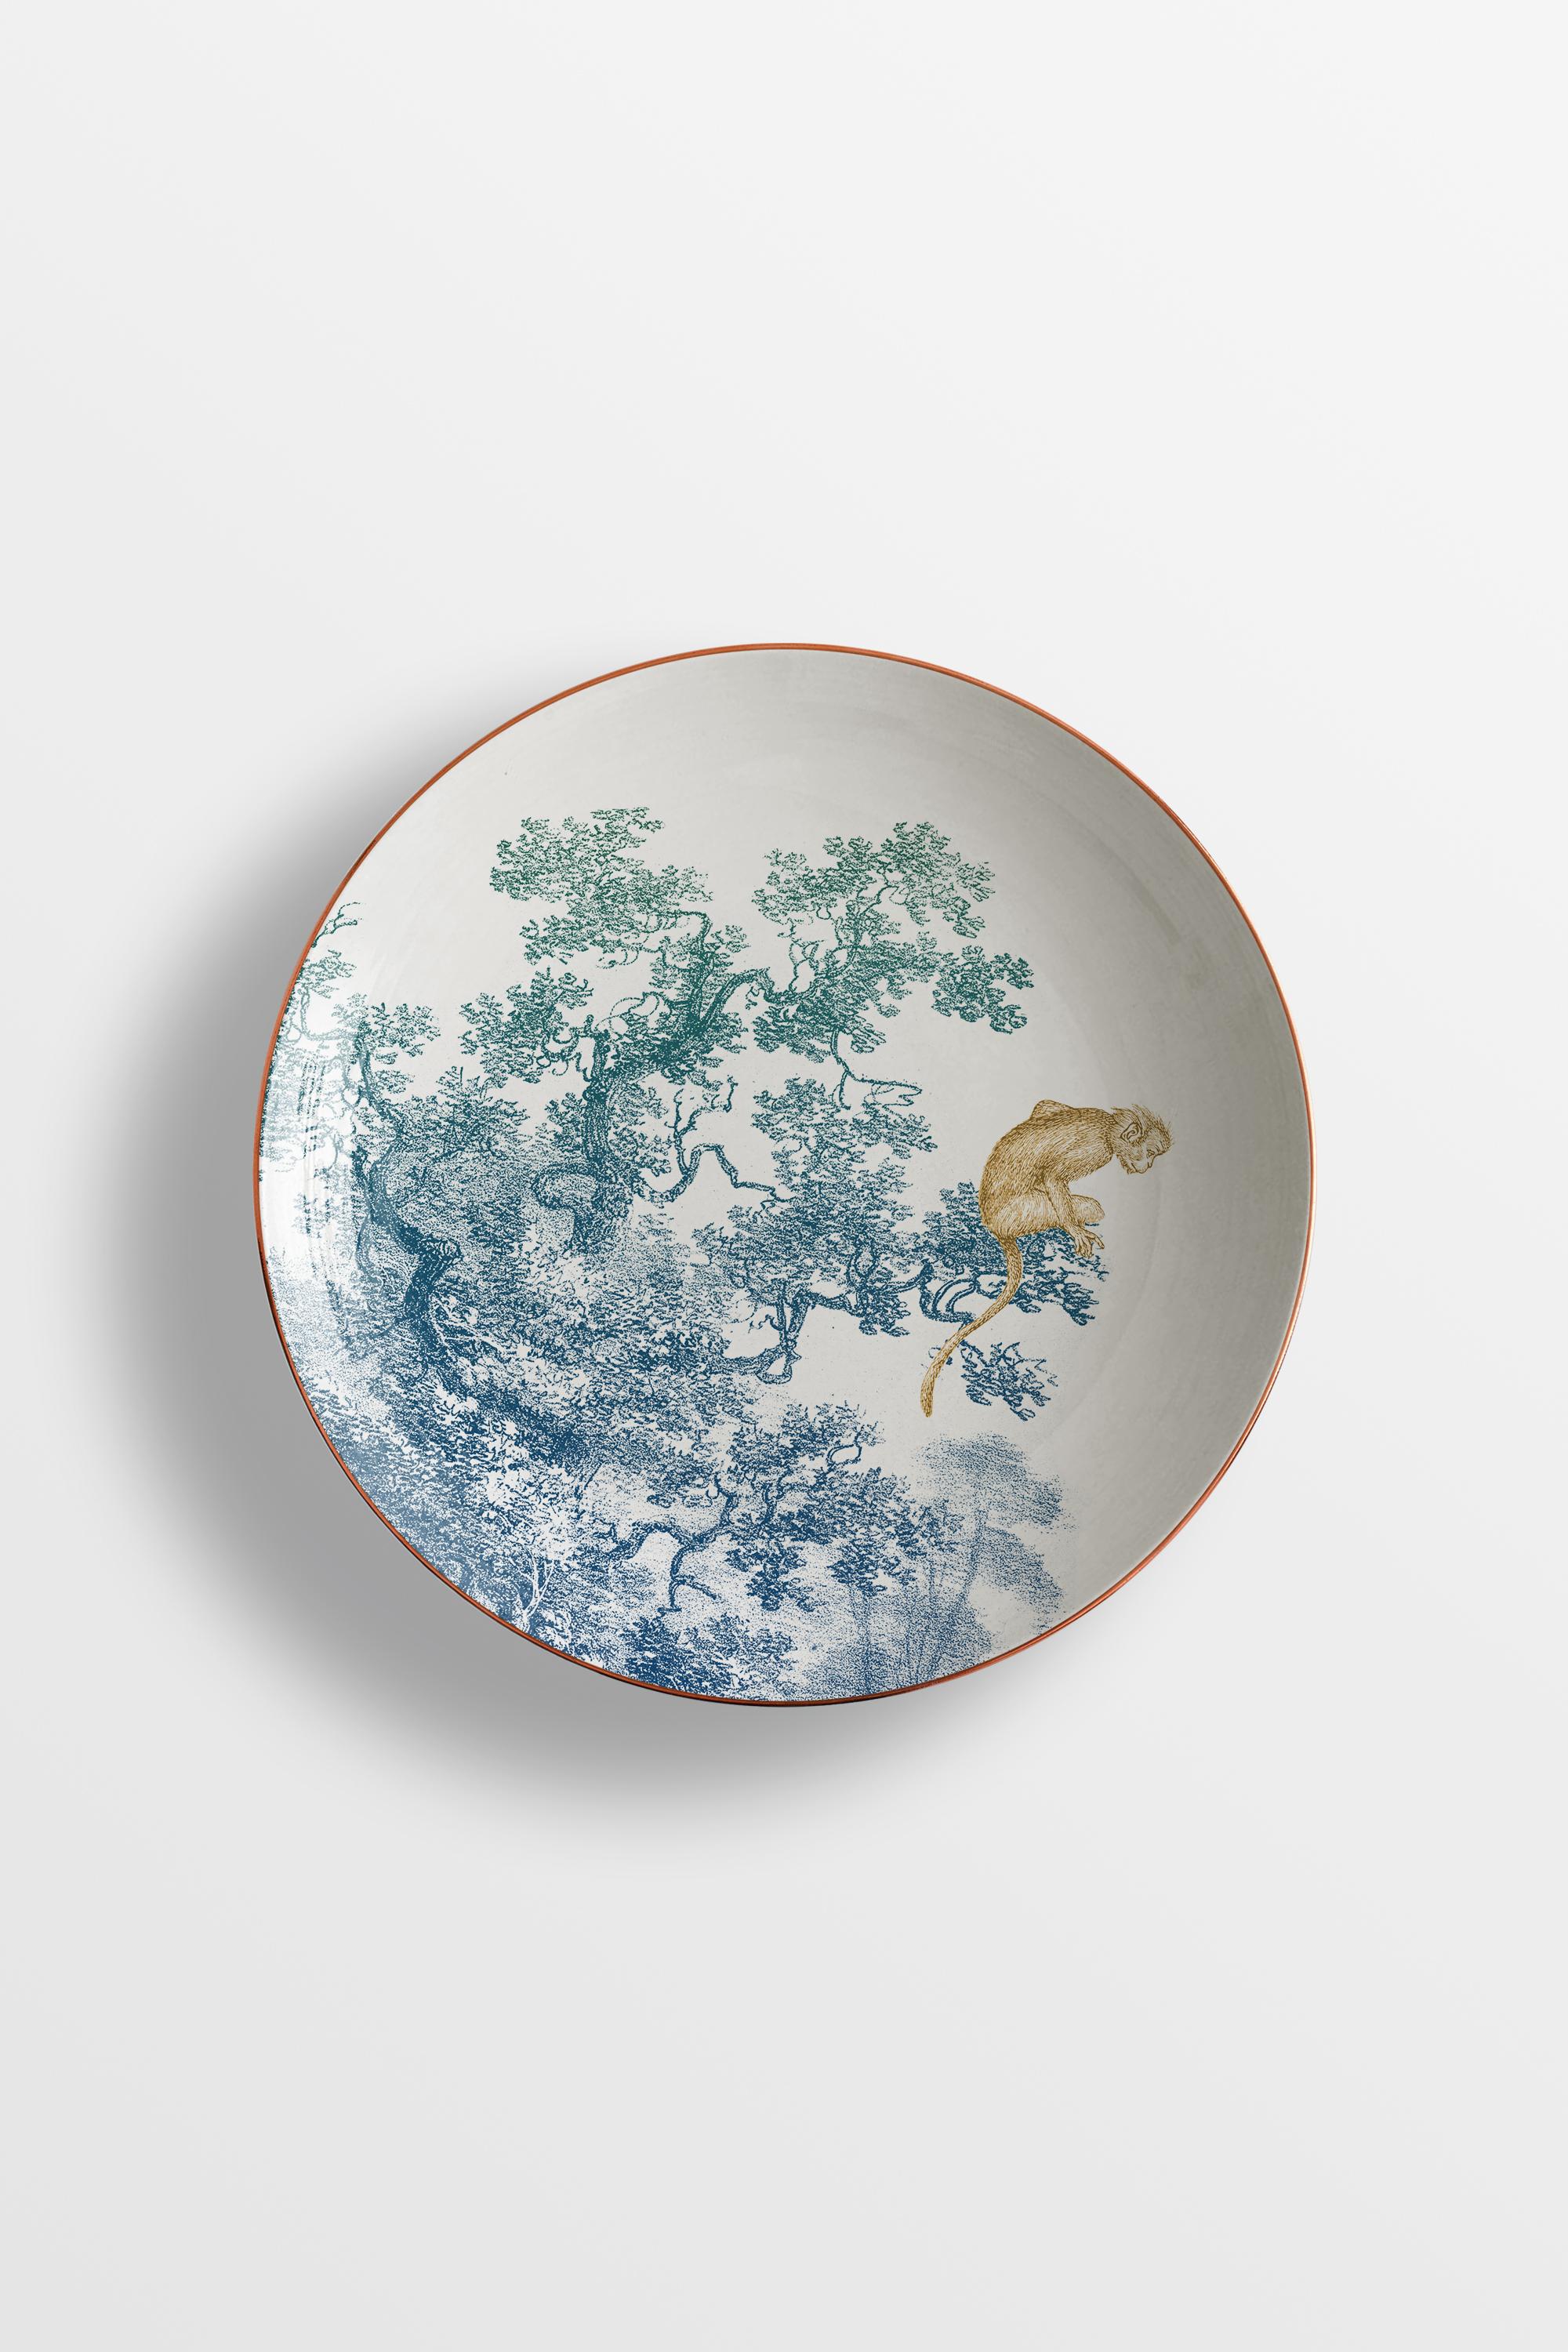 In the vicinity of a Buddhist temple, the slow and cyclical flow of time is outlined.
The Galtaji collection tells an Indian astronomical garden, where monkeys populate the branches of the trees in their daily activities. Everything is shrouded in